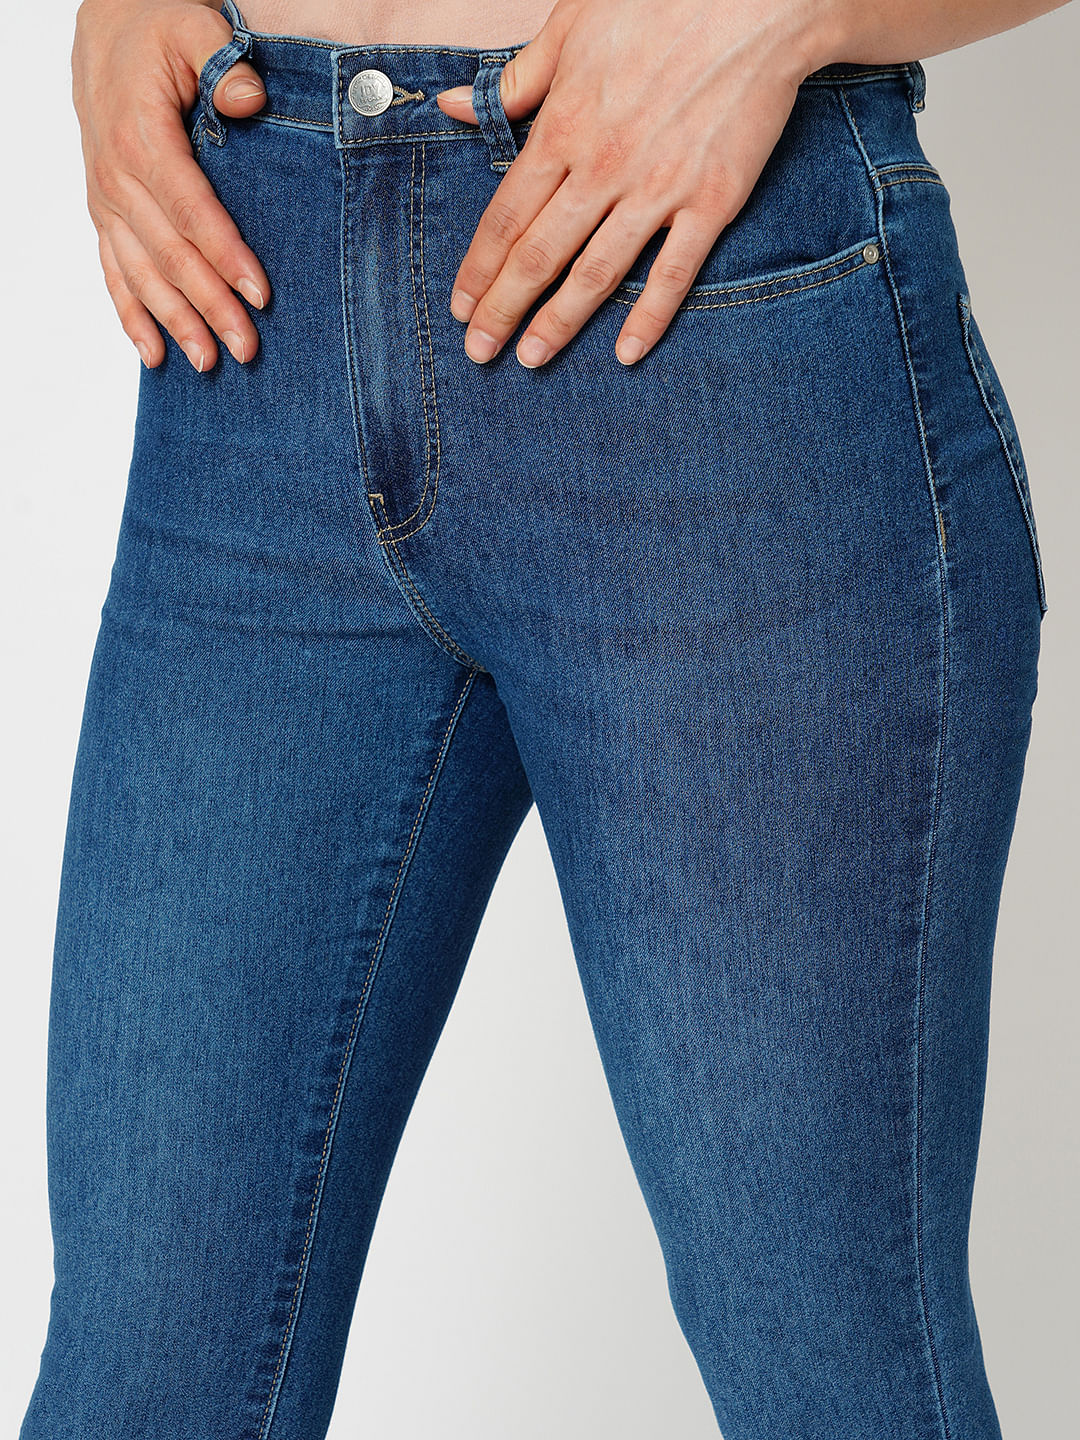 Only Blush Mid Rise Flared Jeans in Medium Blue Denim | iCLOTHING -  iCLOTHING